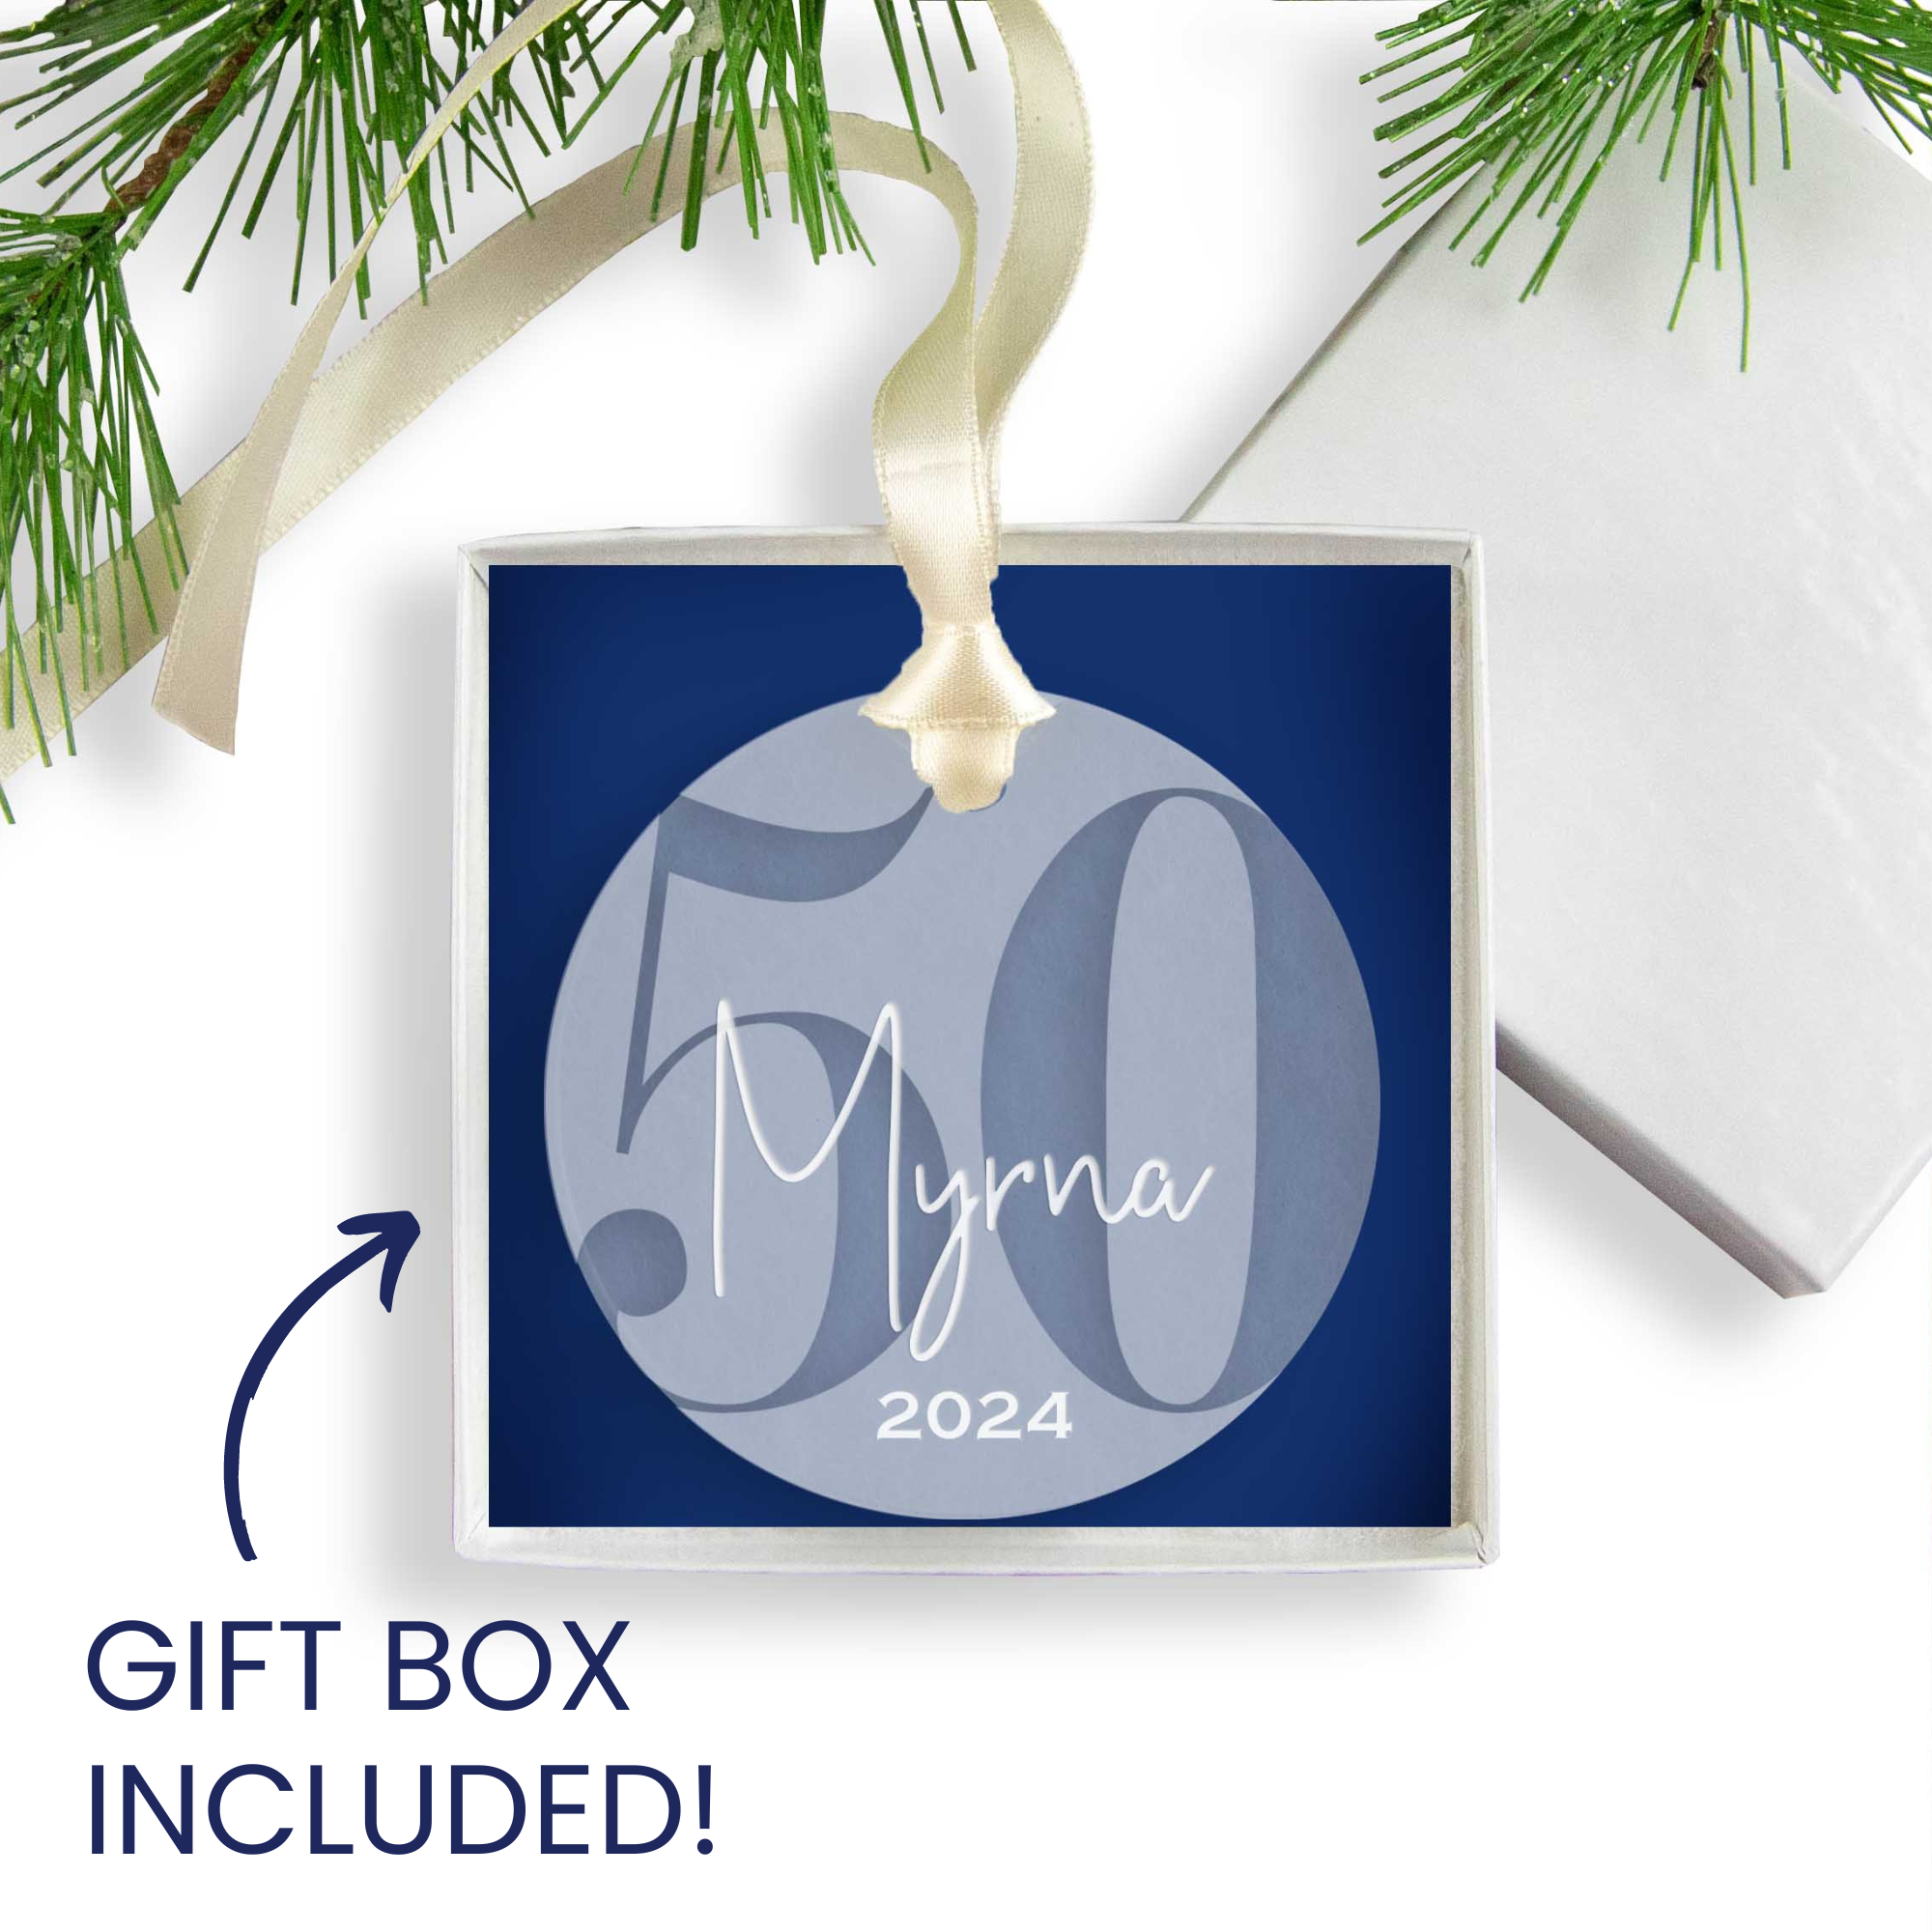 Personalized 50th Birthday Acrylic Christmas Ornament, Gift Box Included